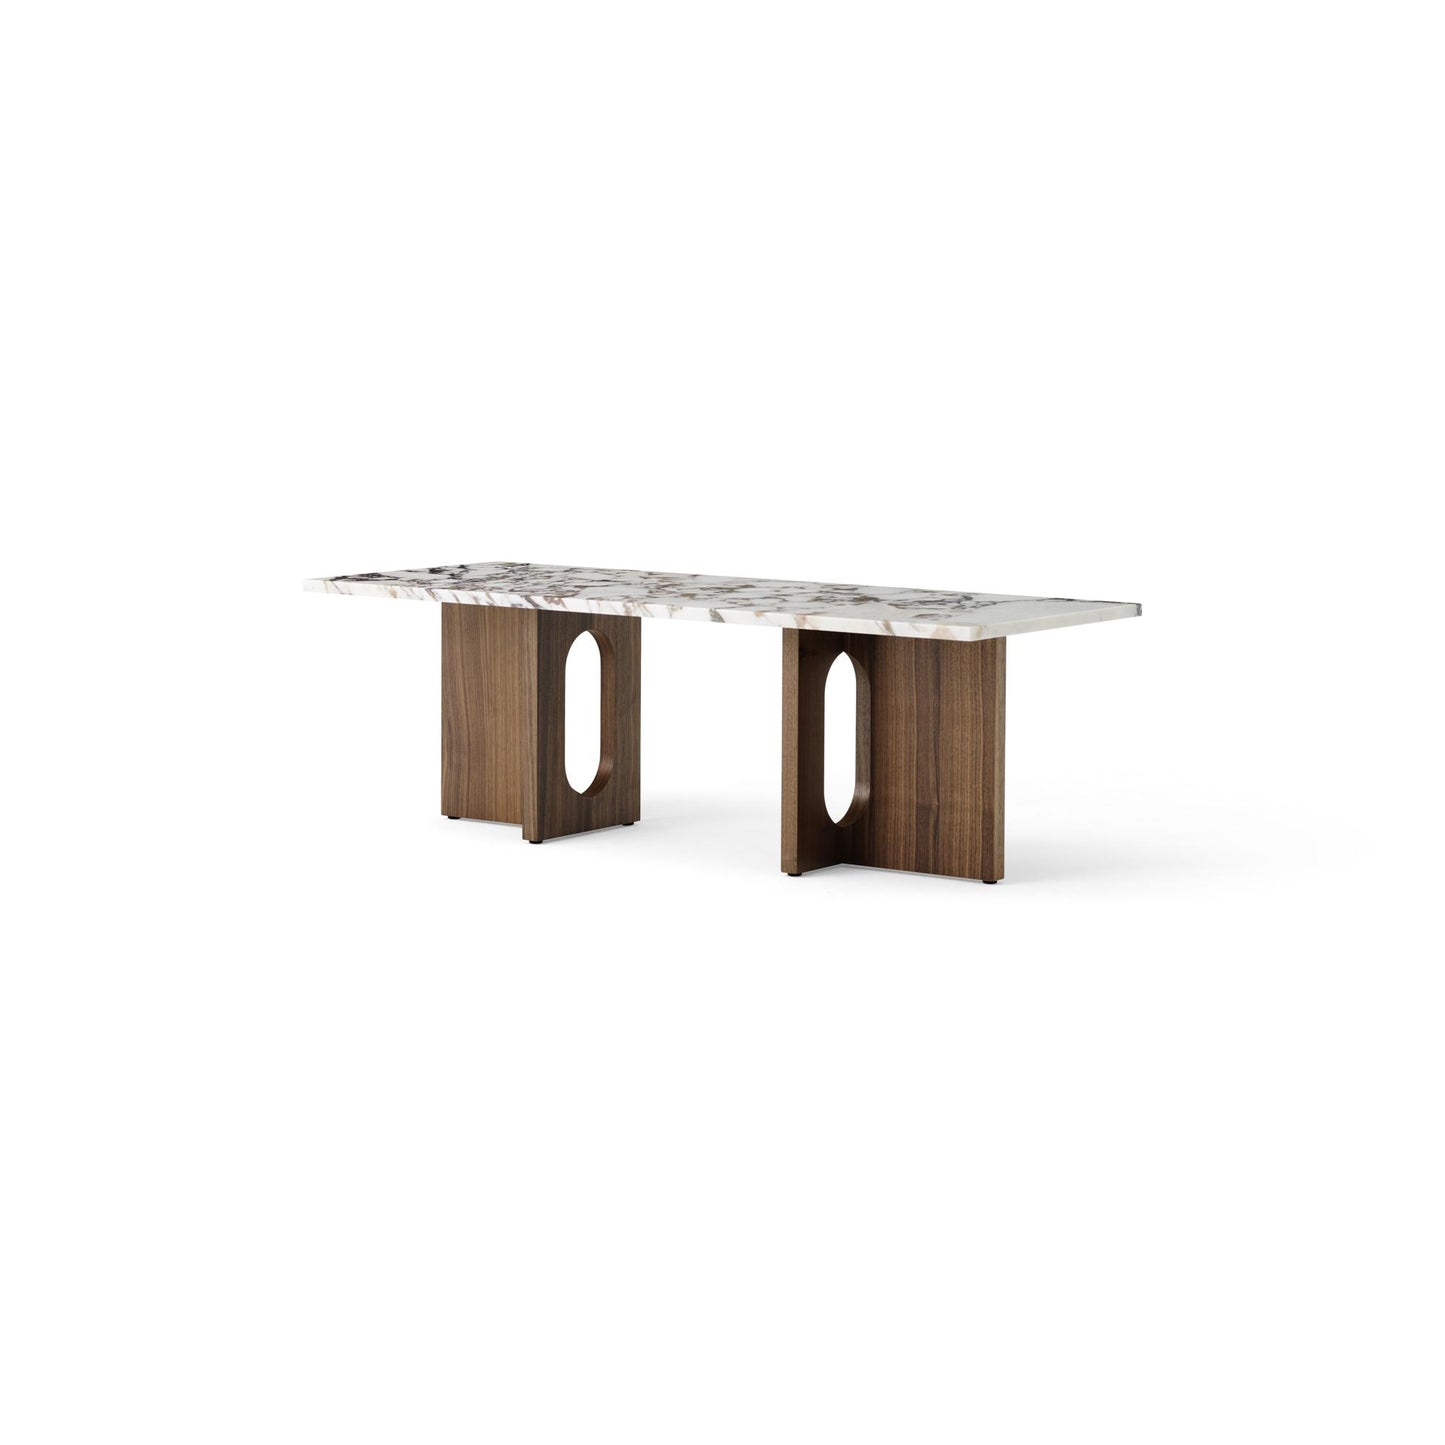 Androgyne Coffee Table by Audo #Walnut / Rose marble